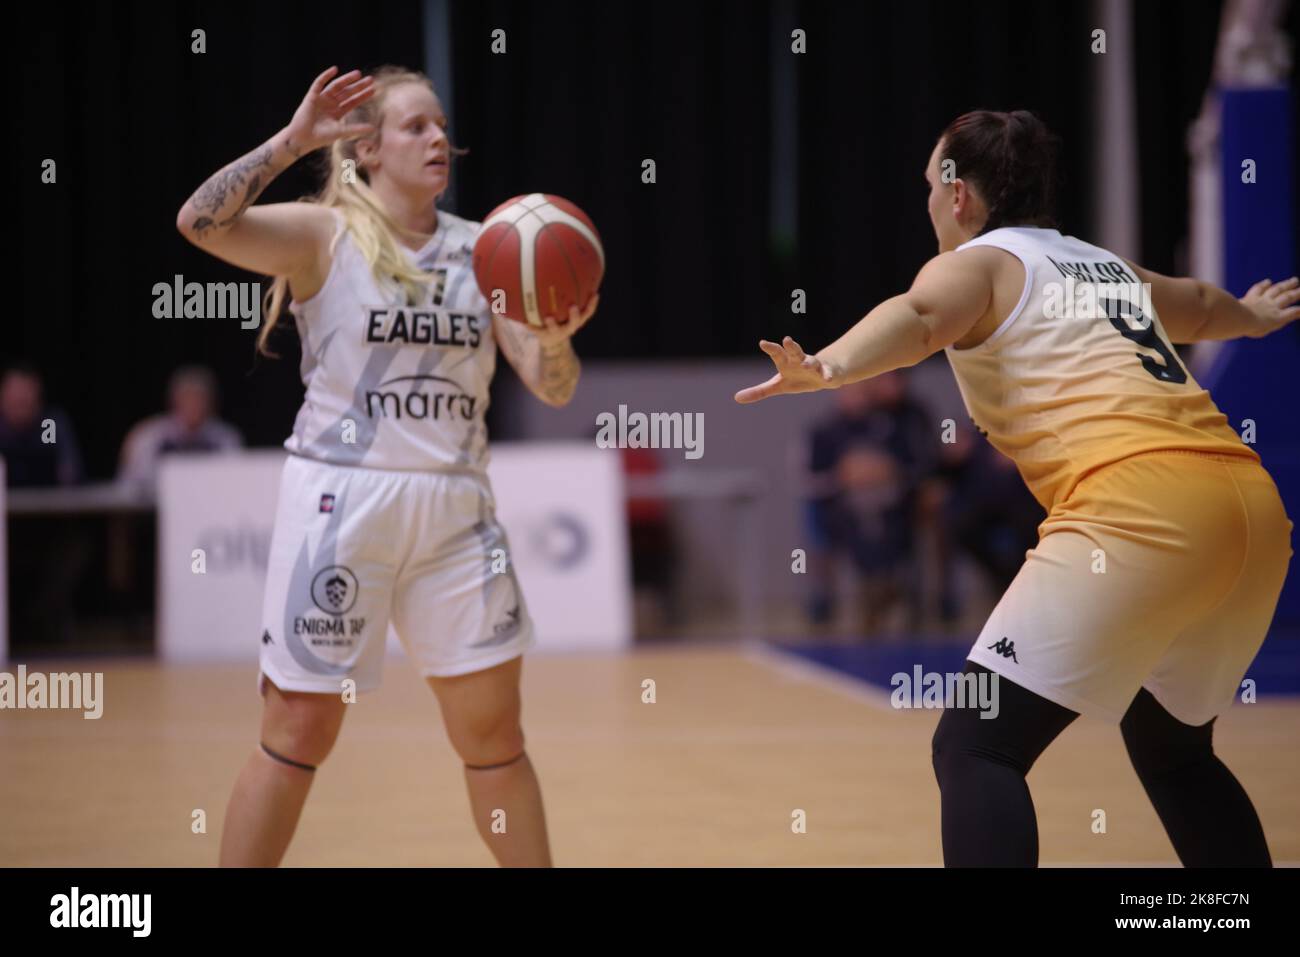 Sheffield, England, 23 October 2022. Maggie Justinak playing for Newcastle Eagles against Sheffield Hatters in a WBBL match at Ponds Forge. Helen Naylor is the defender. Credit: Colin Edwards/Alamy Live News. Stock Photo